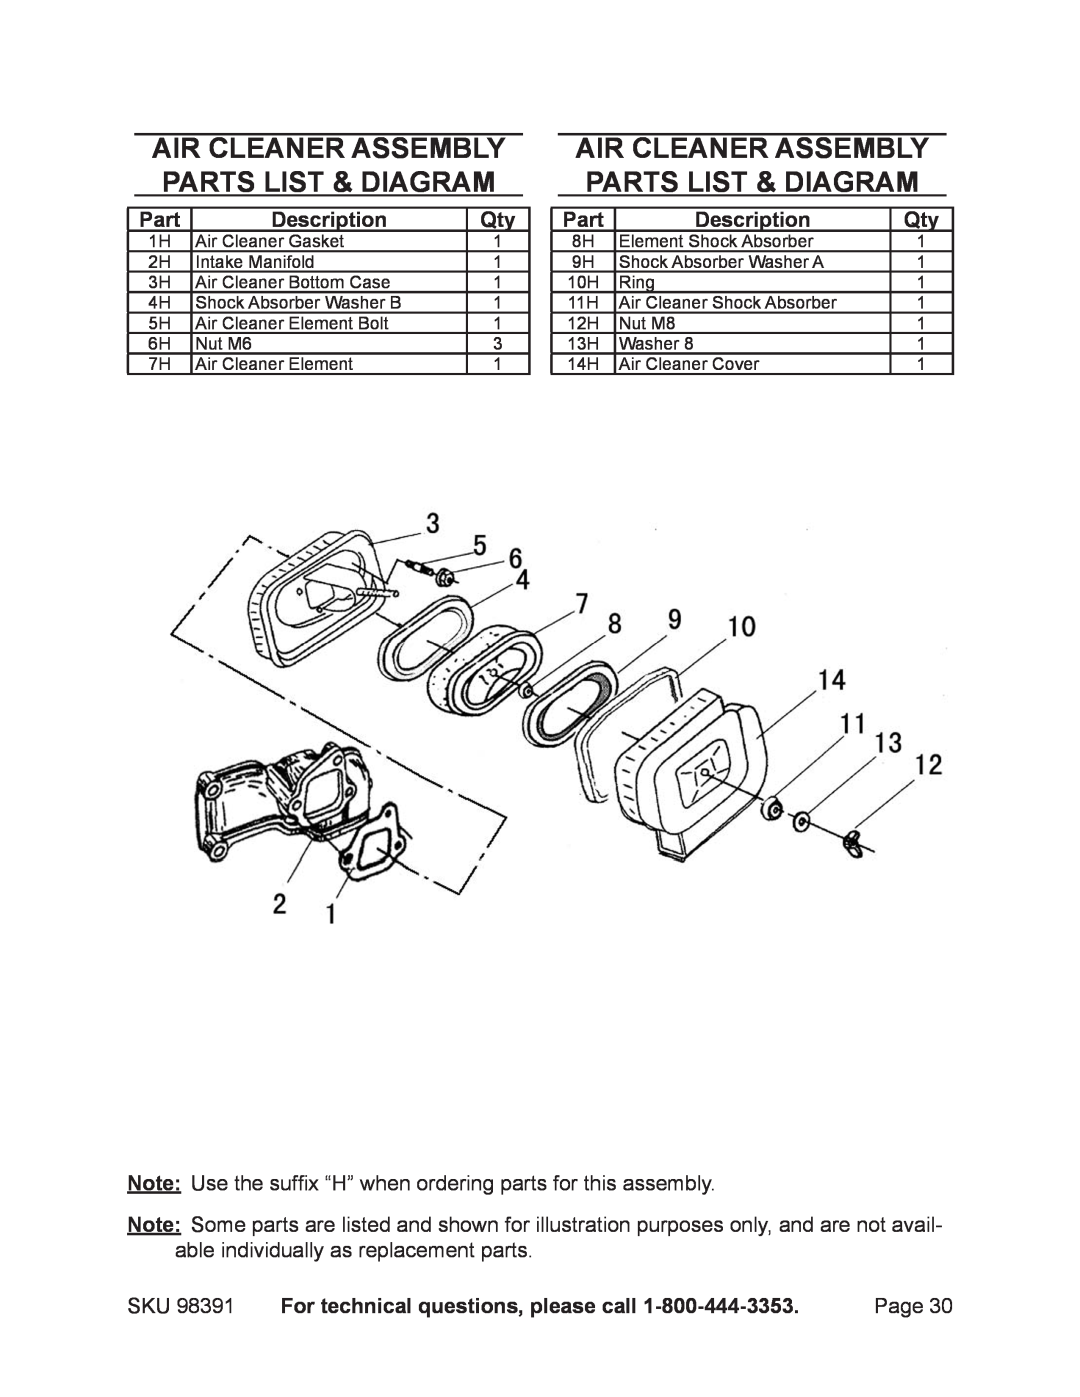 Chicago Electric 98391 Air cleaner assembly PARTS LIST & diagram, Part, Description, For technical questions, please call 